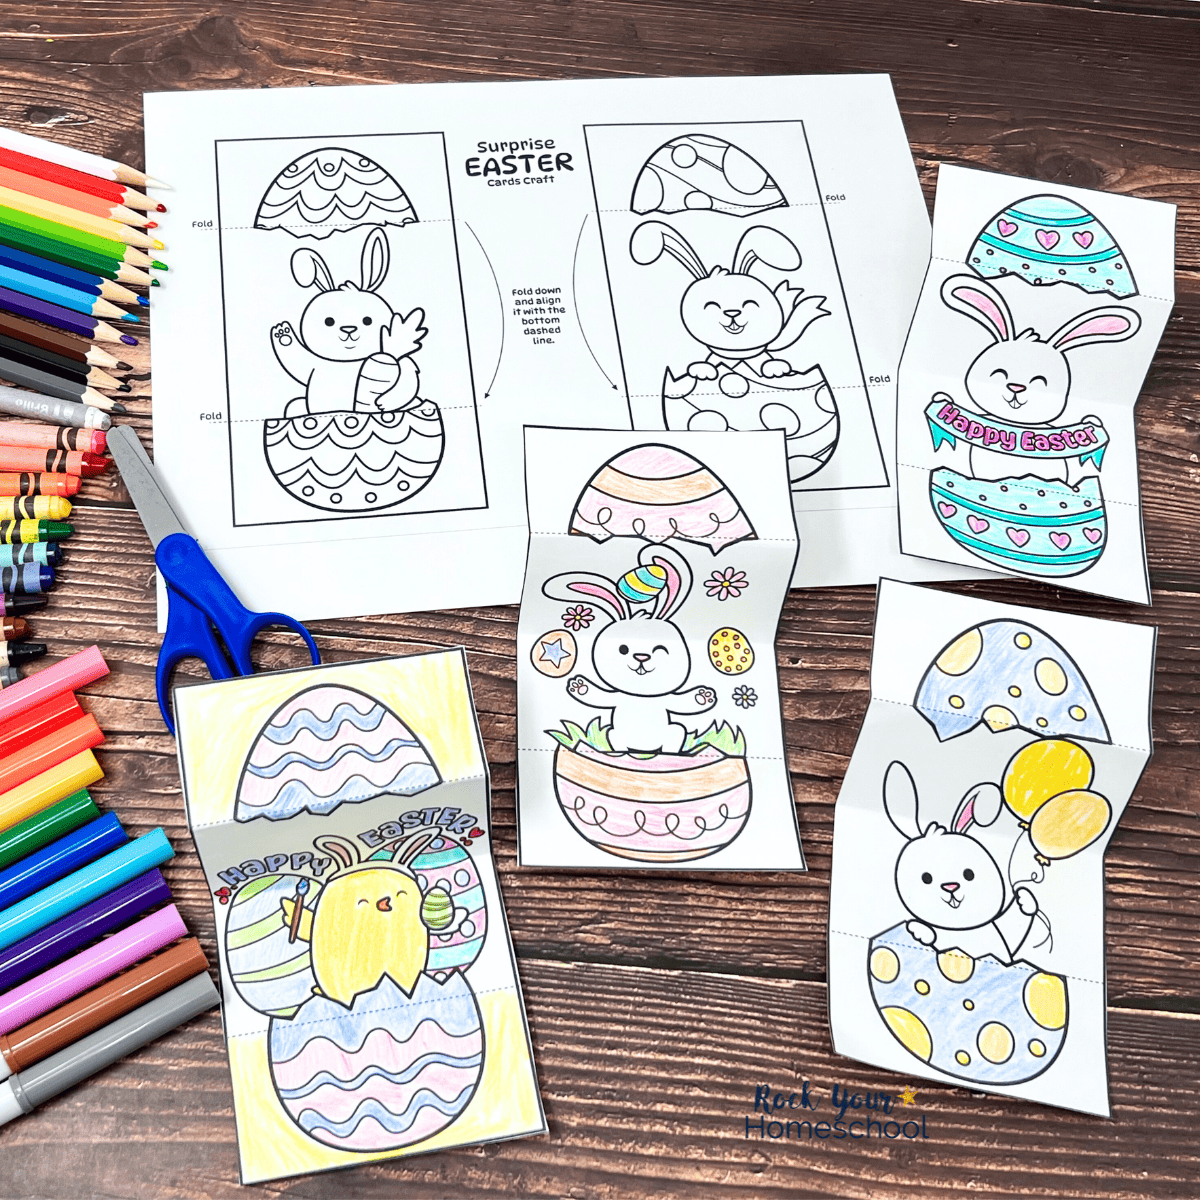 Easter Egg Cards for Kids: 12 Styles to Color for Fun Surprises (Free)